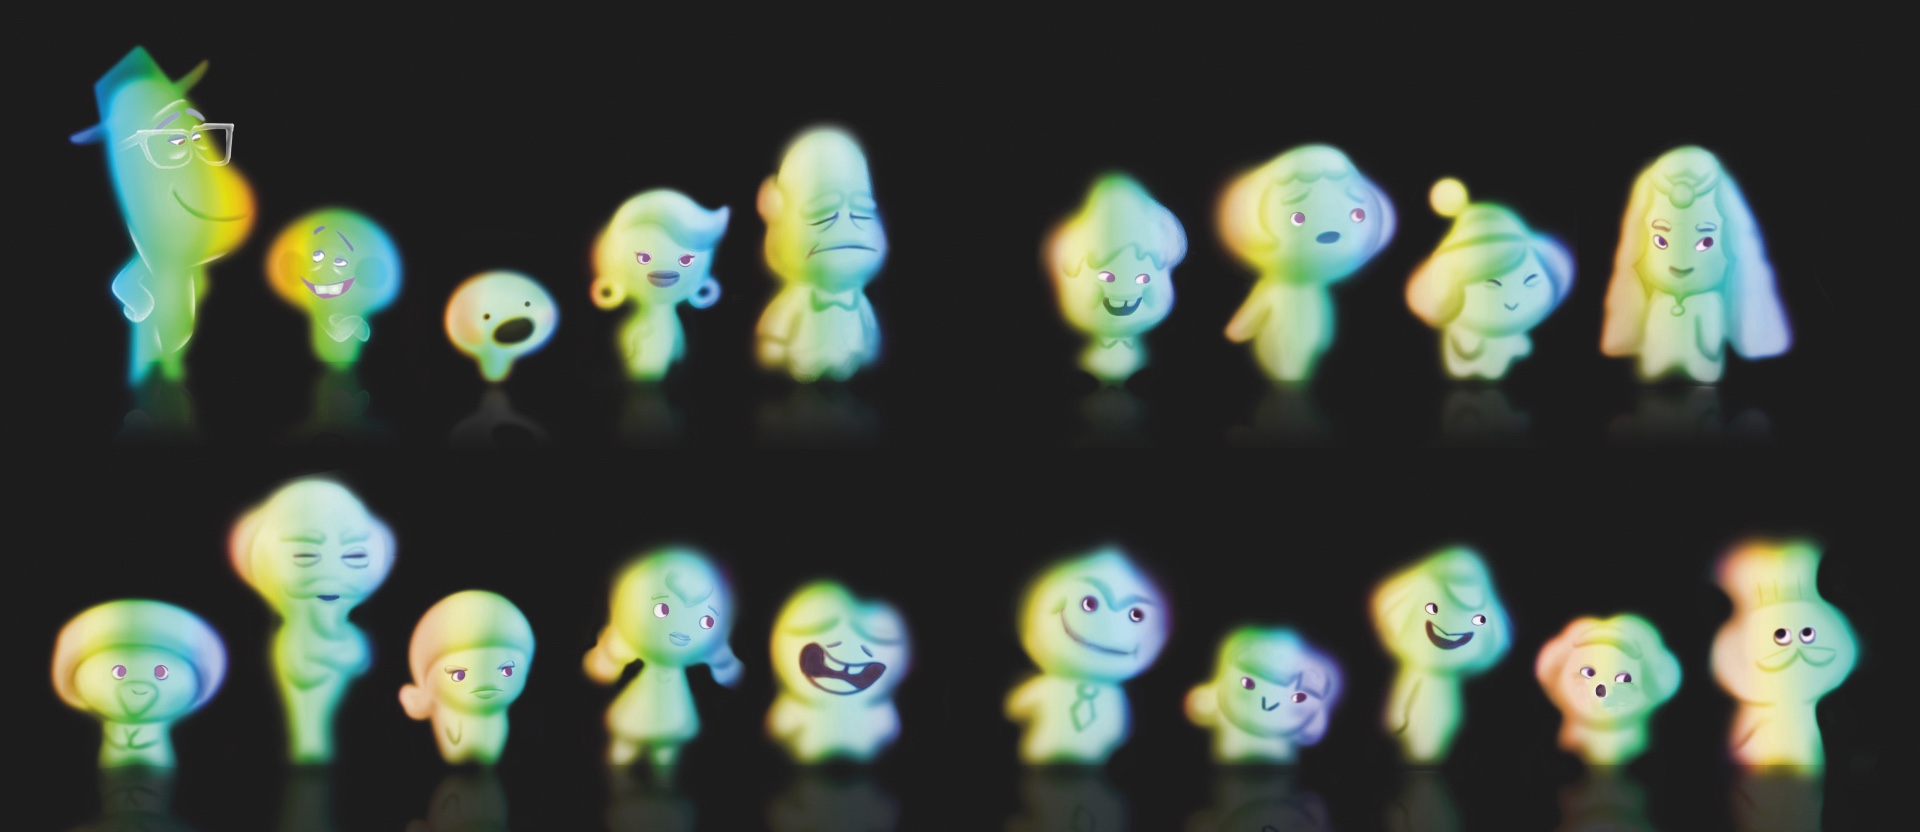 A whole bunch of different Souls. (Image: Disney/Pixar)